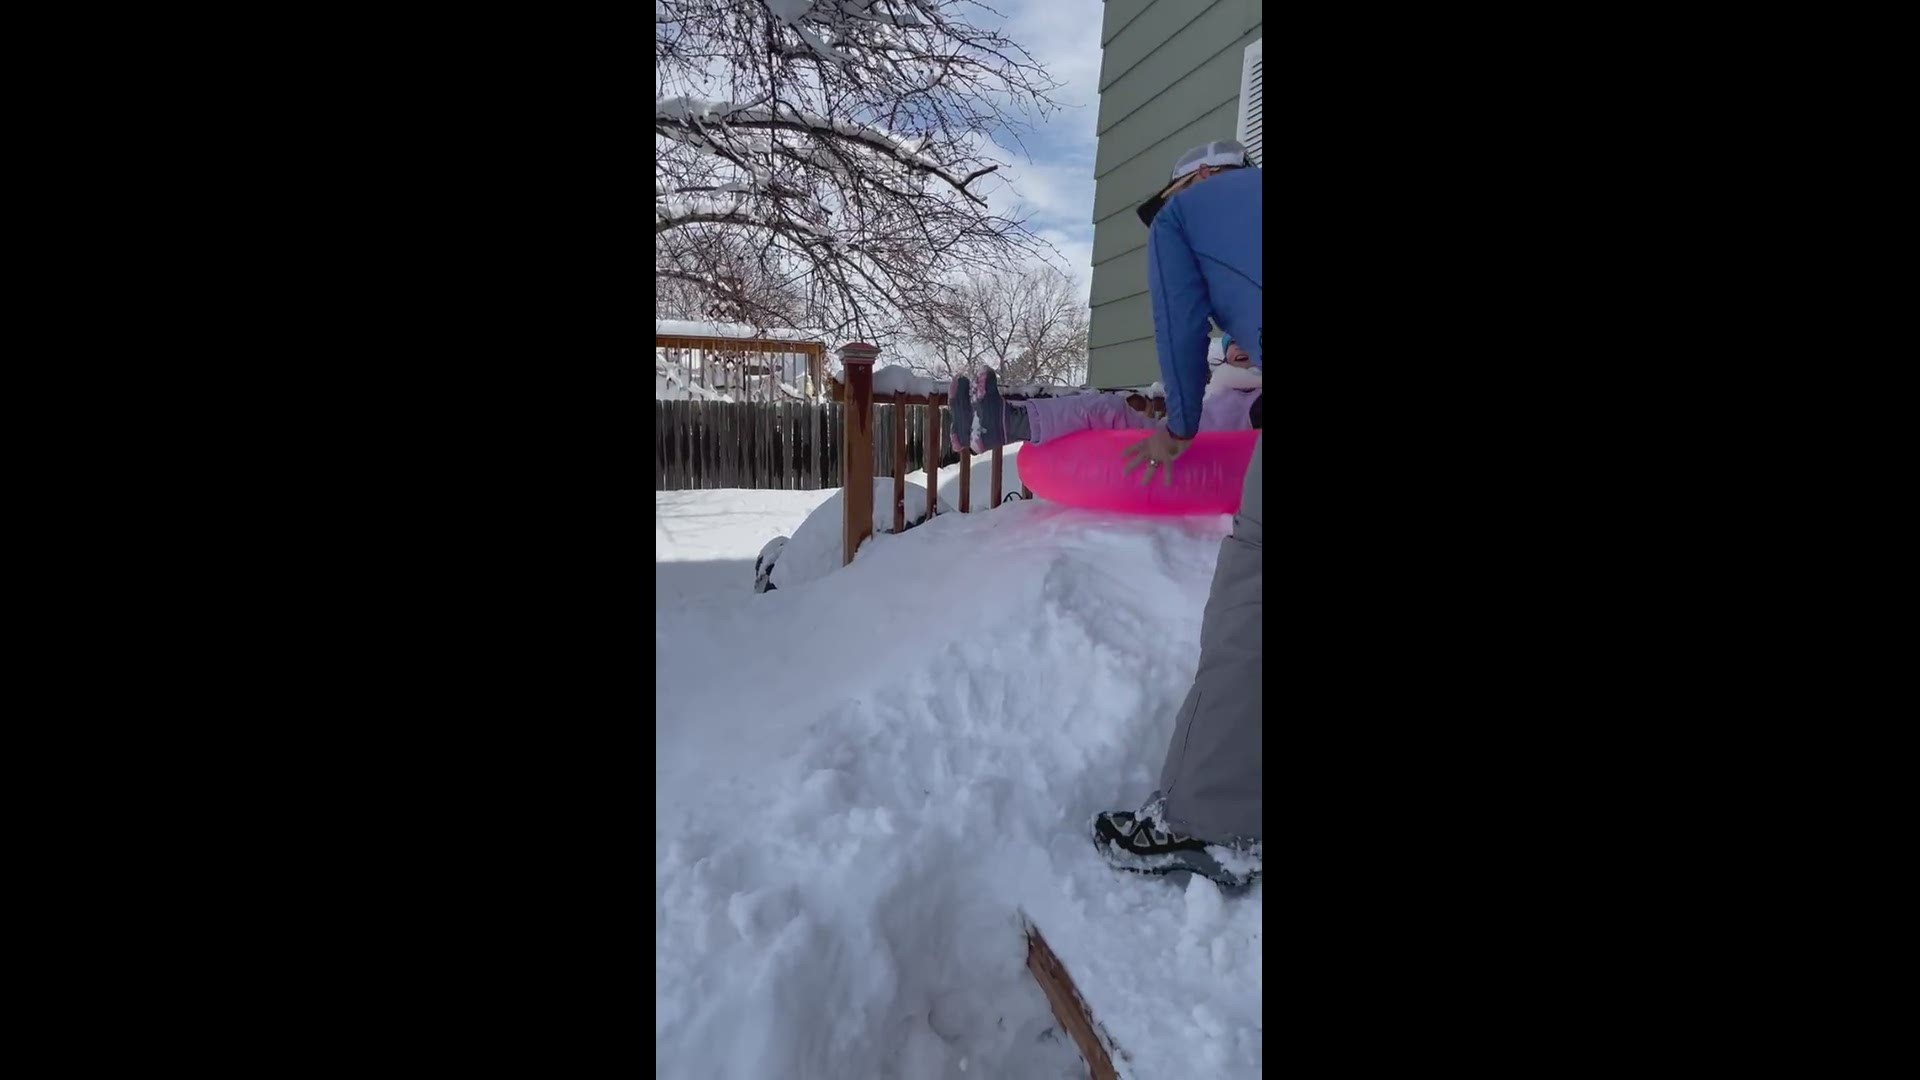 Snow day fun! No need to go anywhere when dad builds a tubing hill in your front yard!
Credit: Hillary Osmack